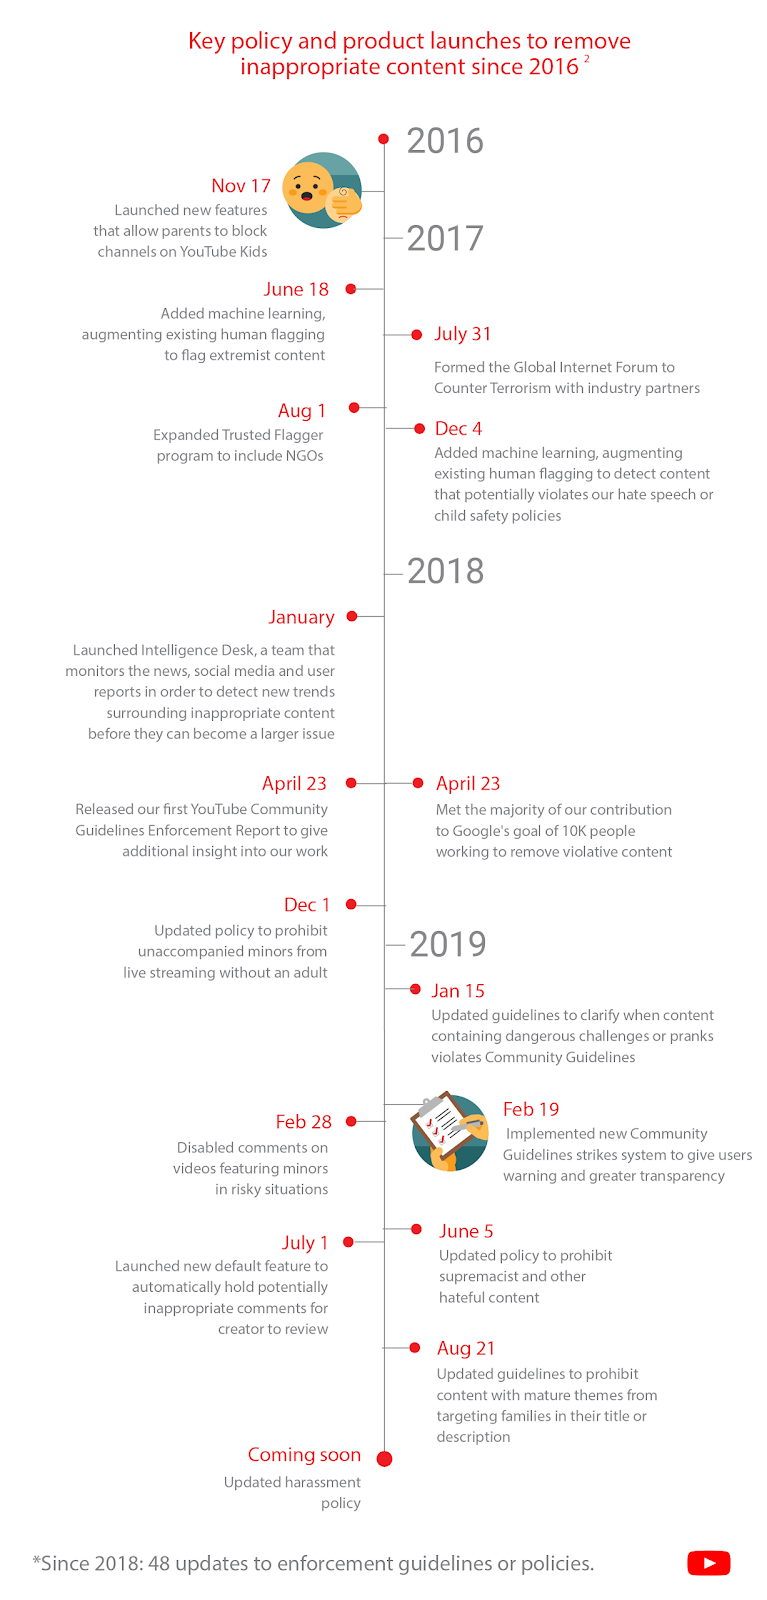 An infographic showing YouTube’s policy changes since 2016 to increase the removal of “inappropriate content.”